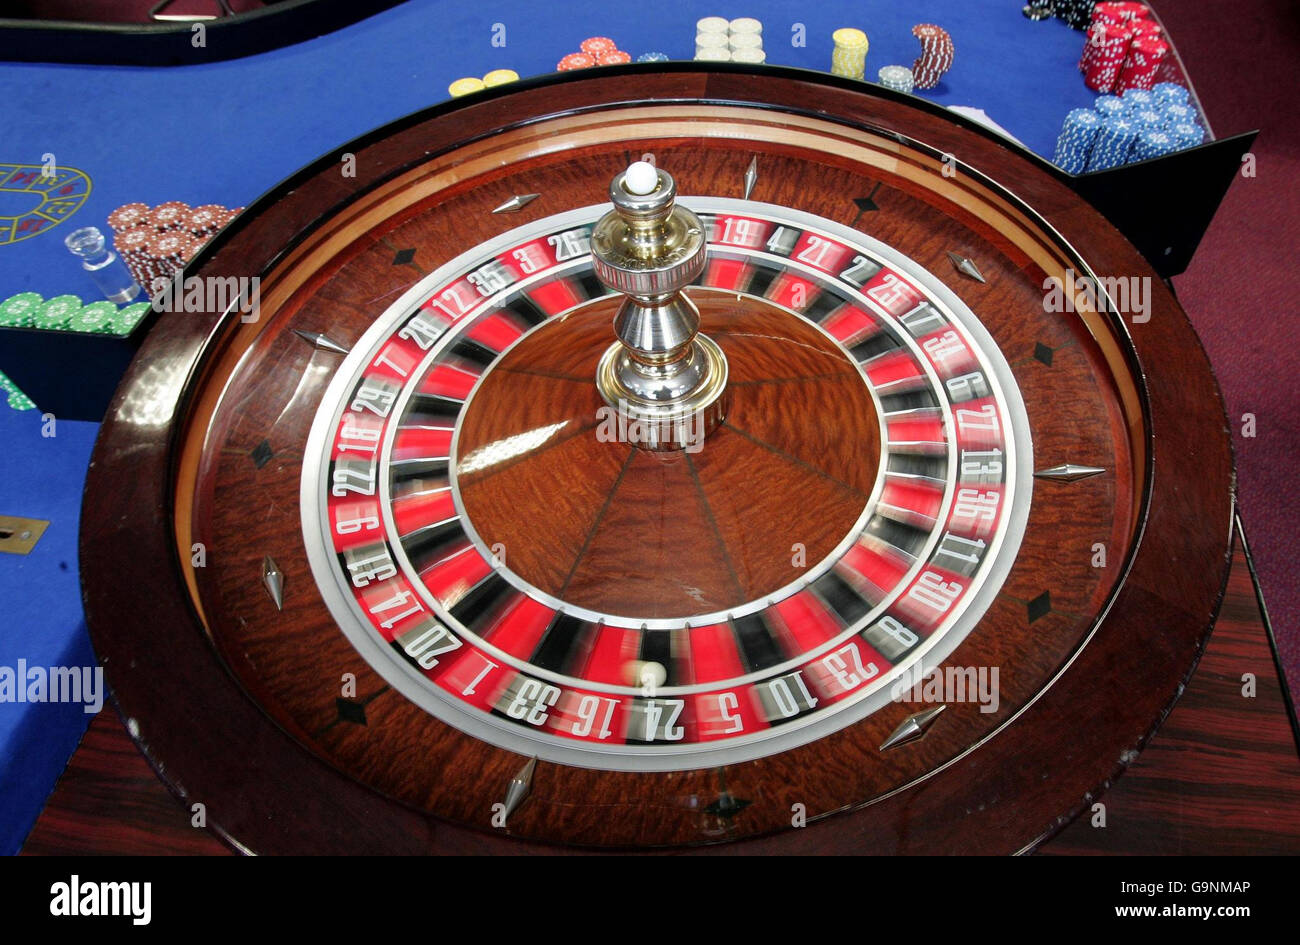 A roulette wheel at the regional gaming academy at Blackpool and Fylde college, based in the Lancashire seaside town of Blackpool - one of the frontrunners among the seven areas shortlisted to host Britain's first supercasino. Stock Photo